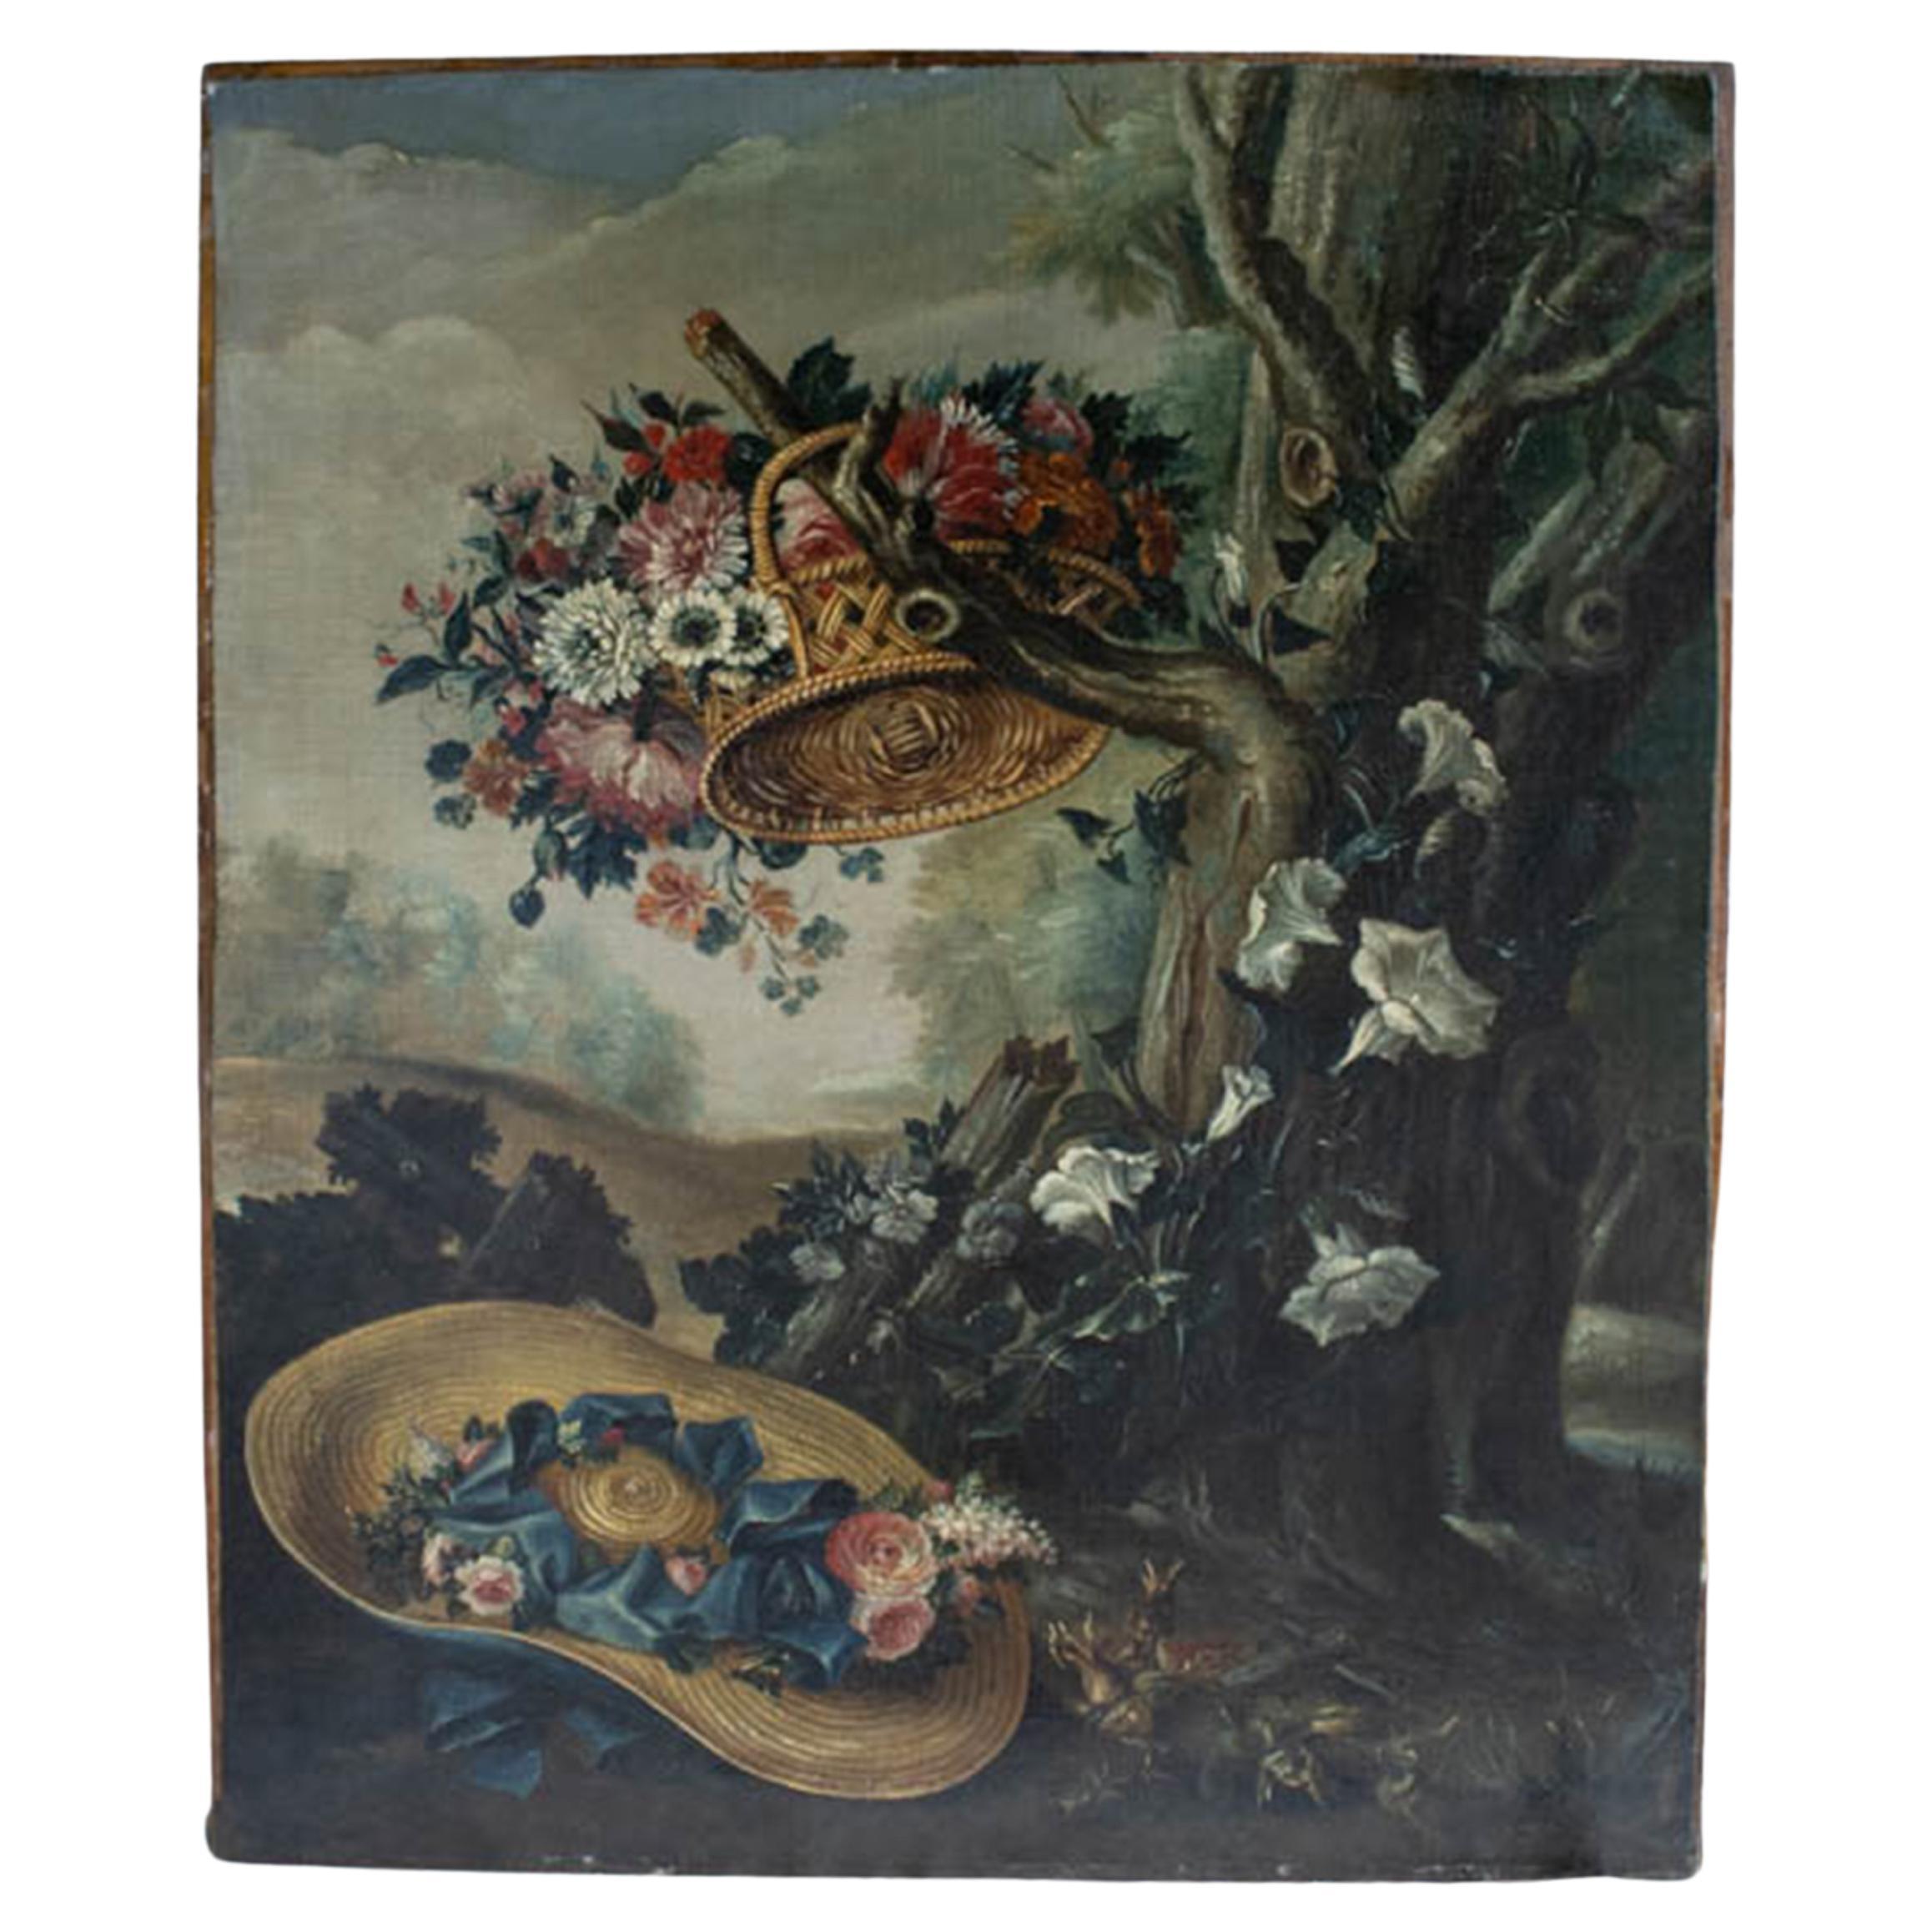 Oil on Canvas Representing Flowers. 19th Century French School